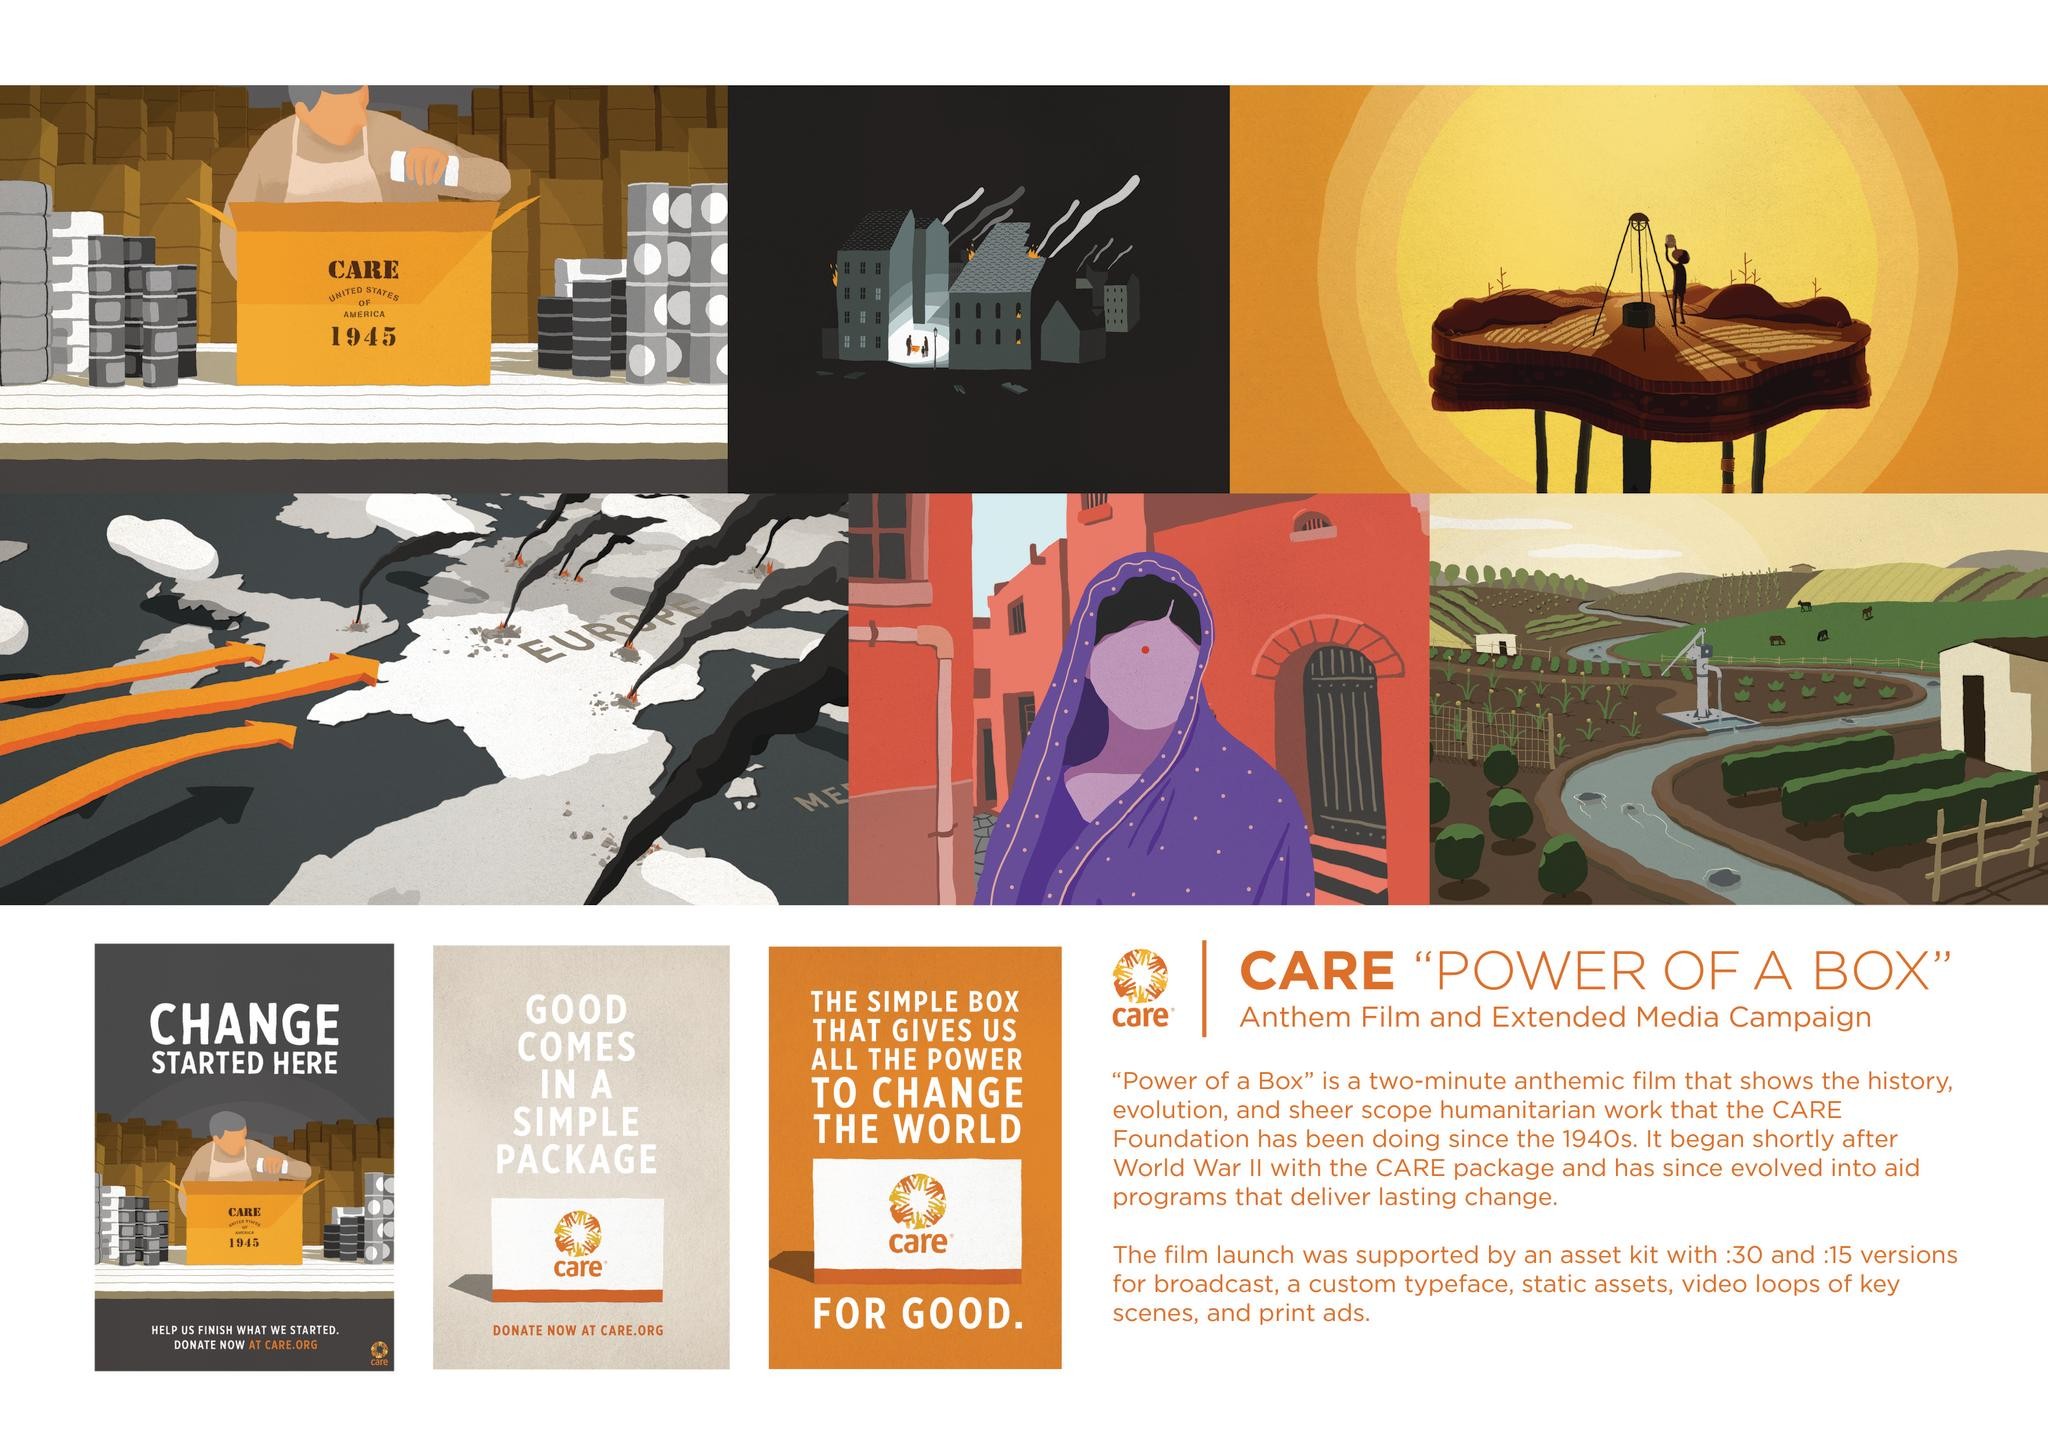 Care "Power of A Box"